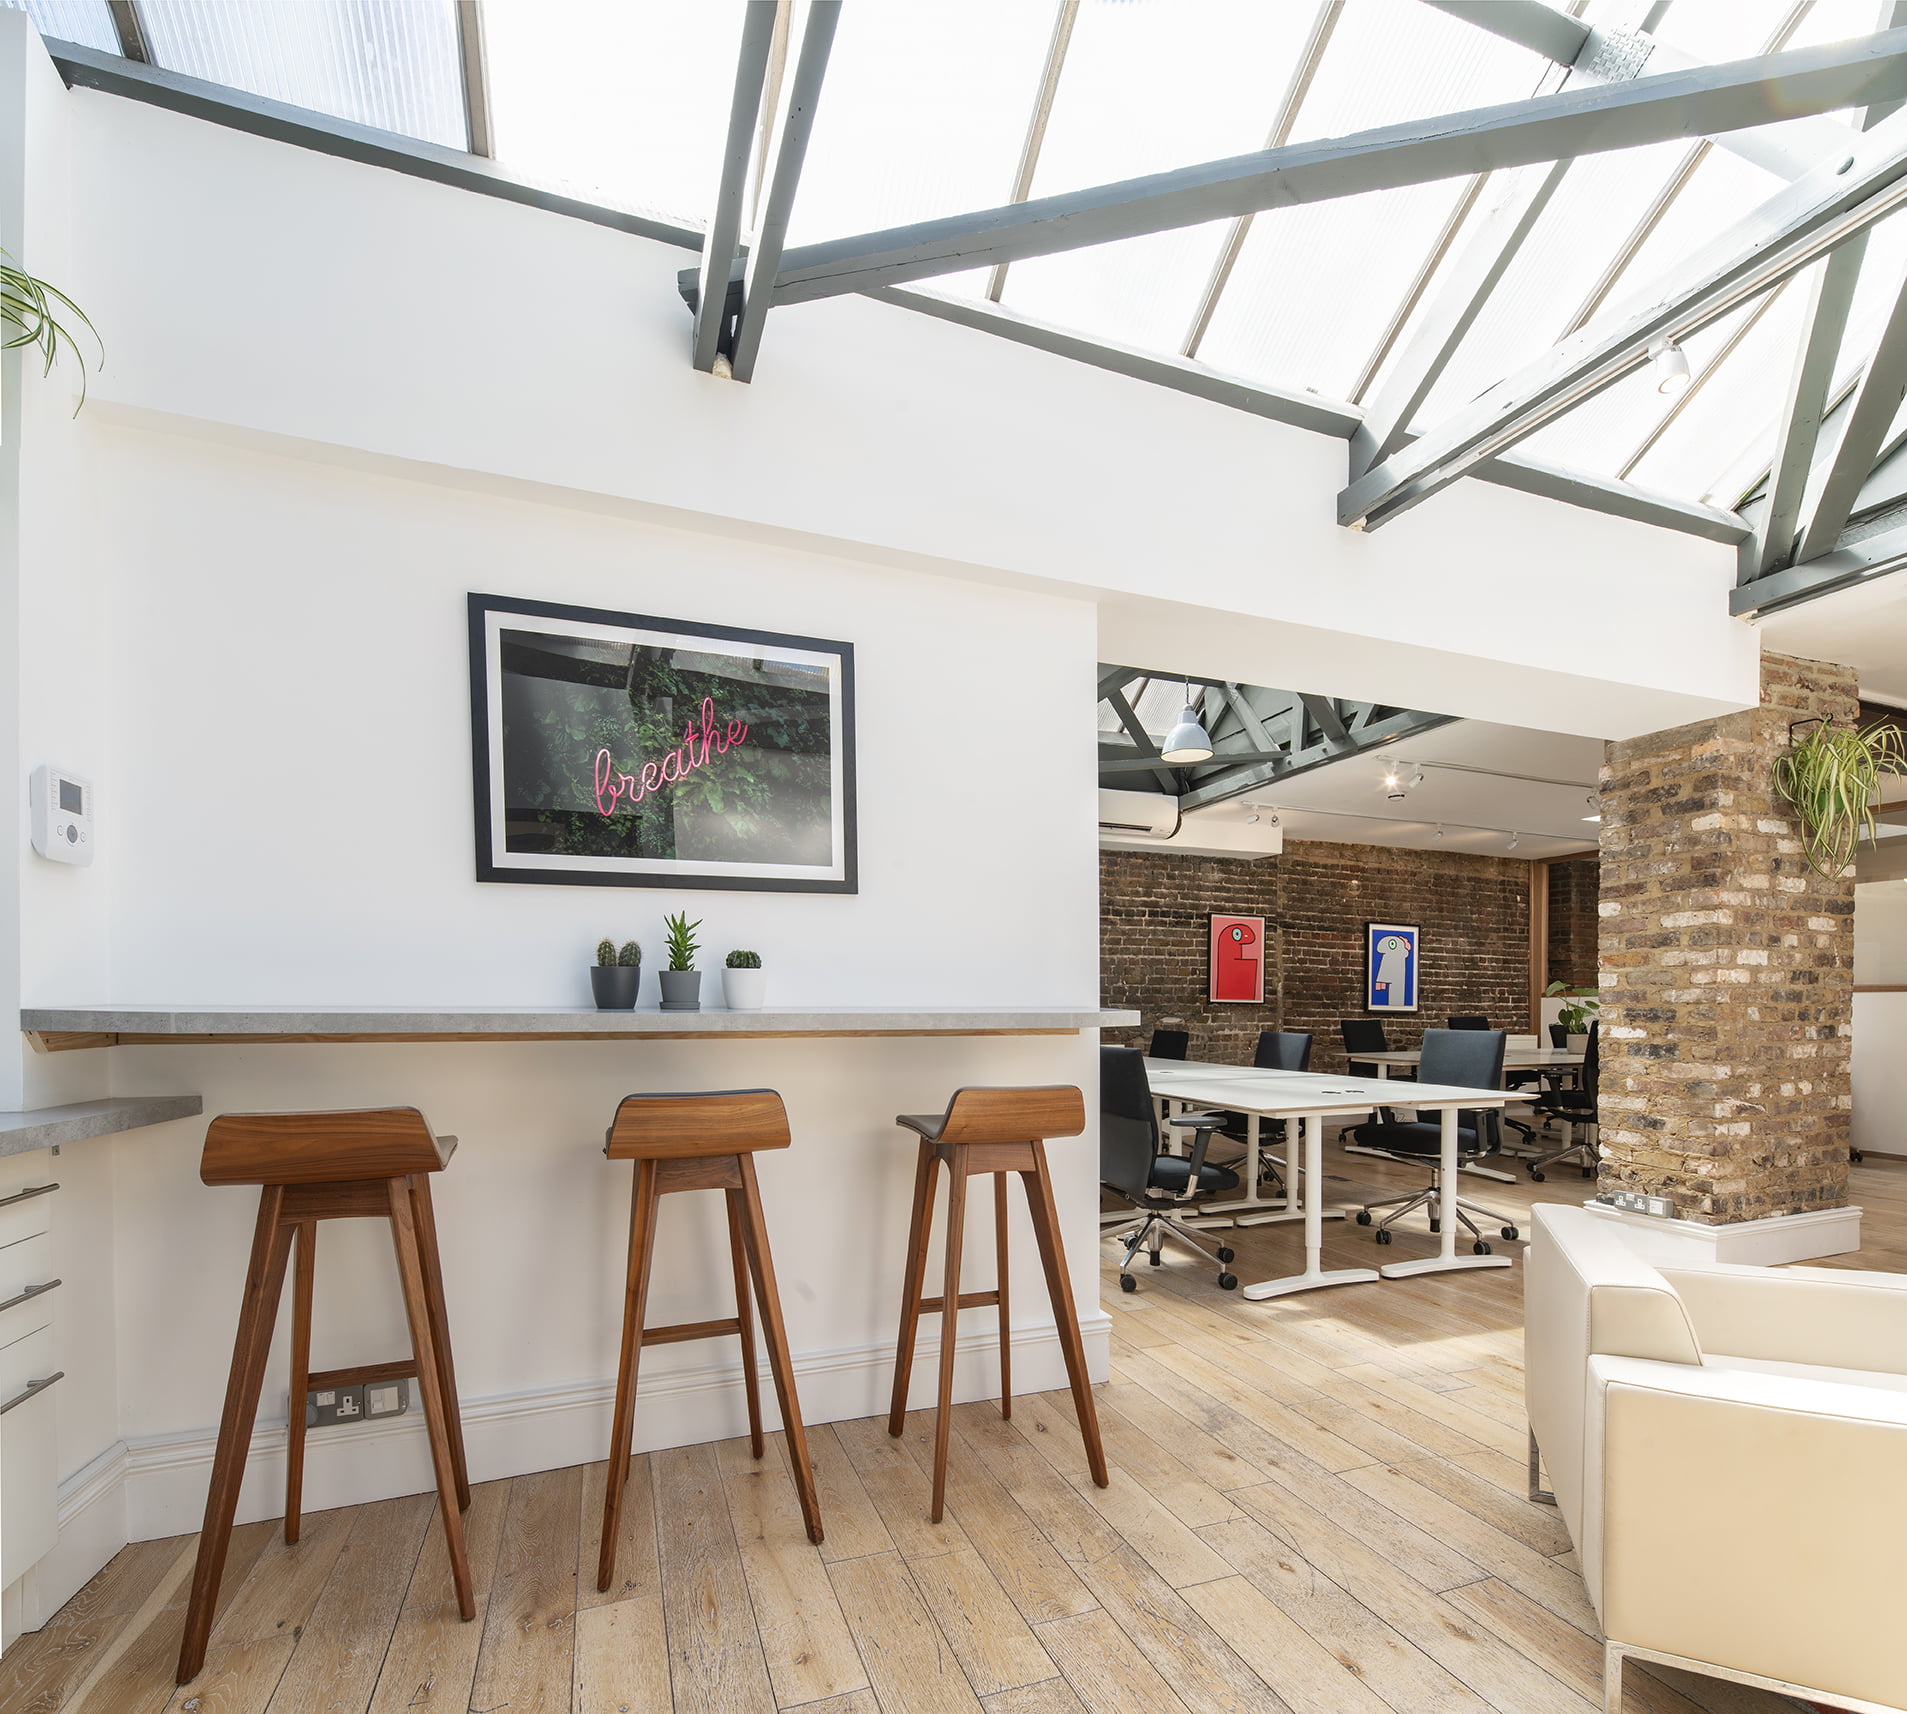 Serviced offices in Shoreditch